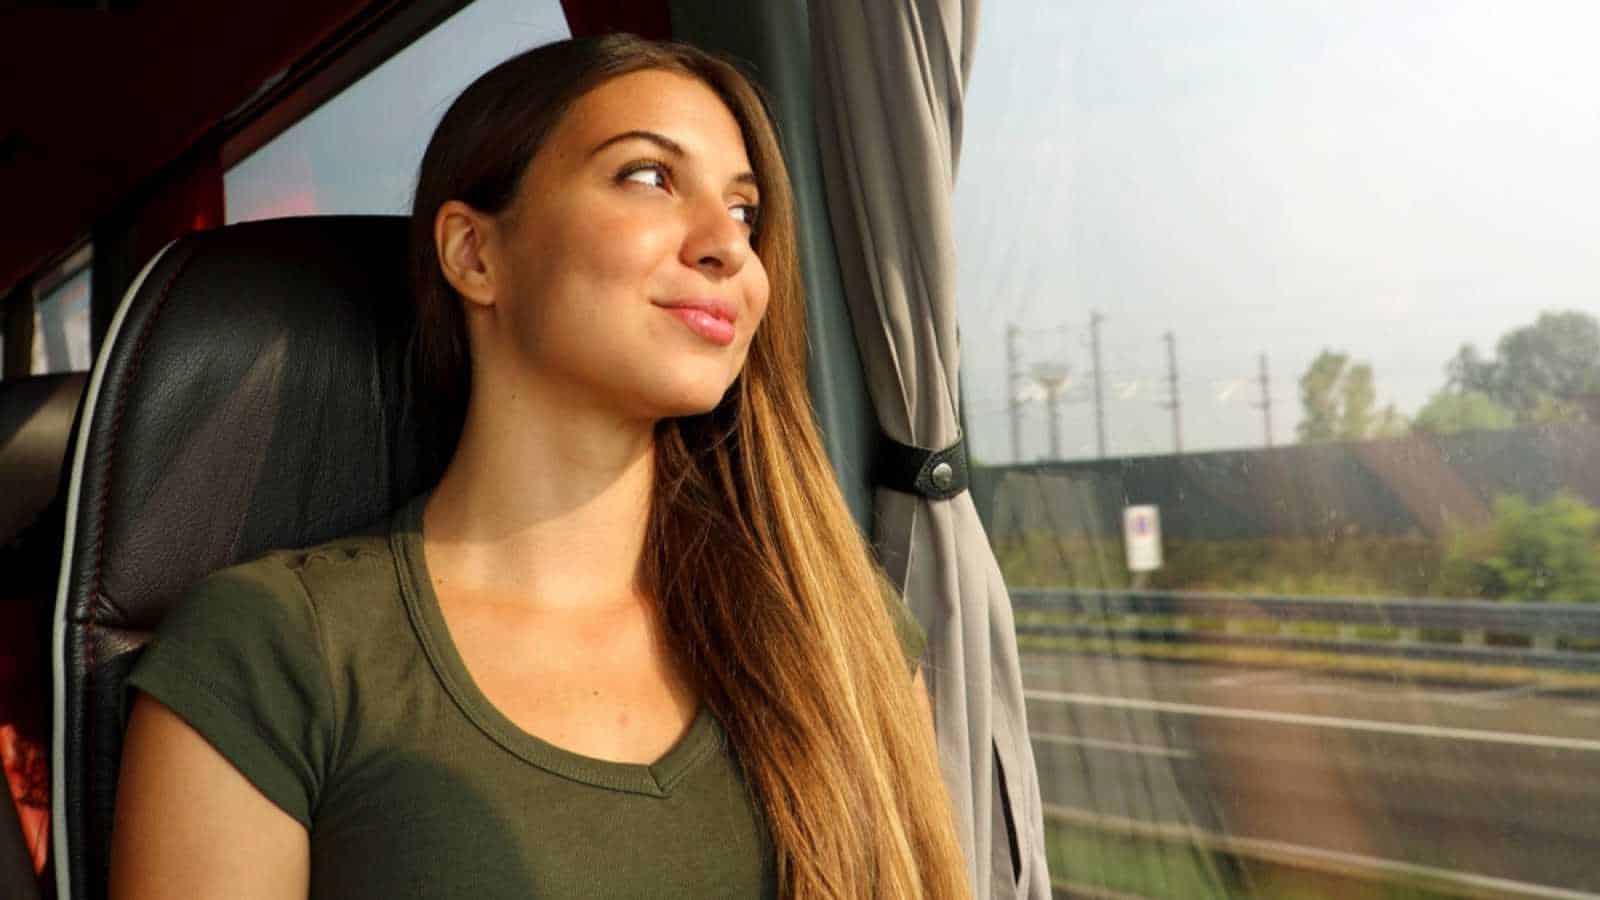 Woman tourist traveling in train